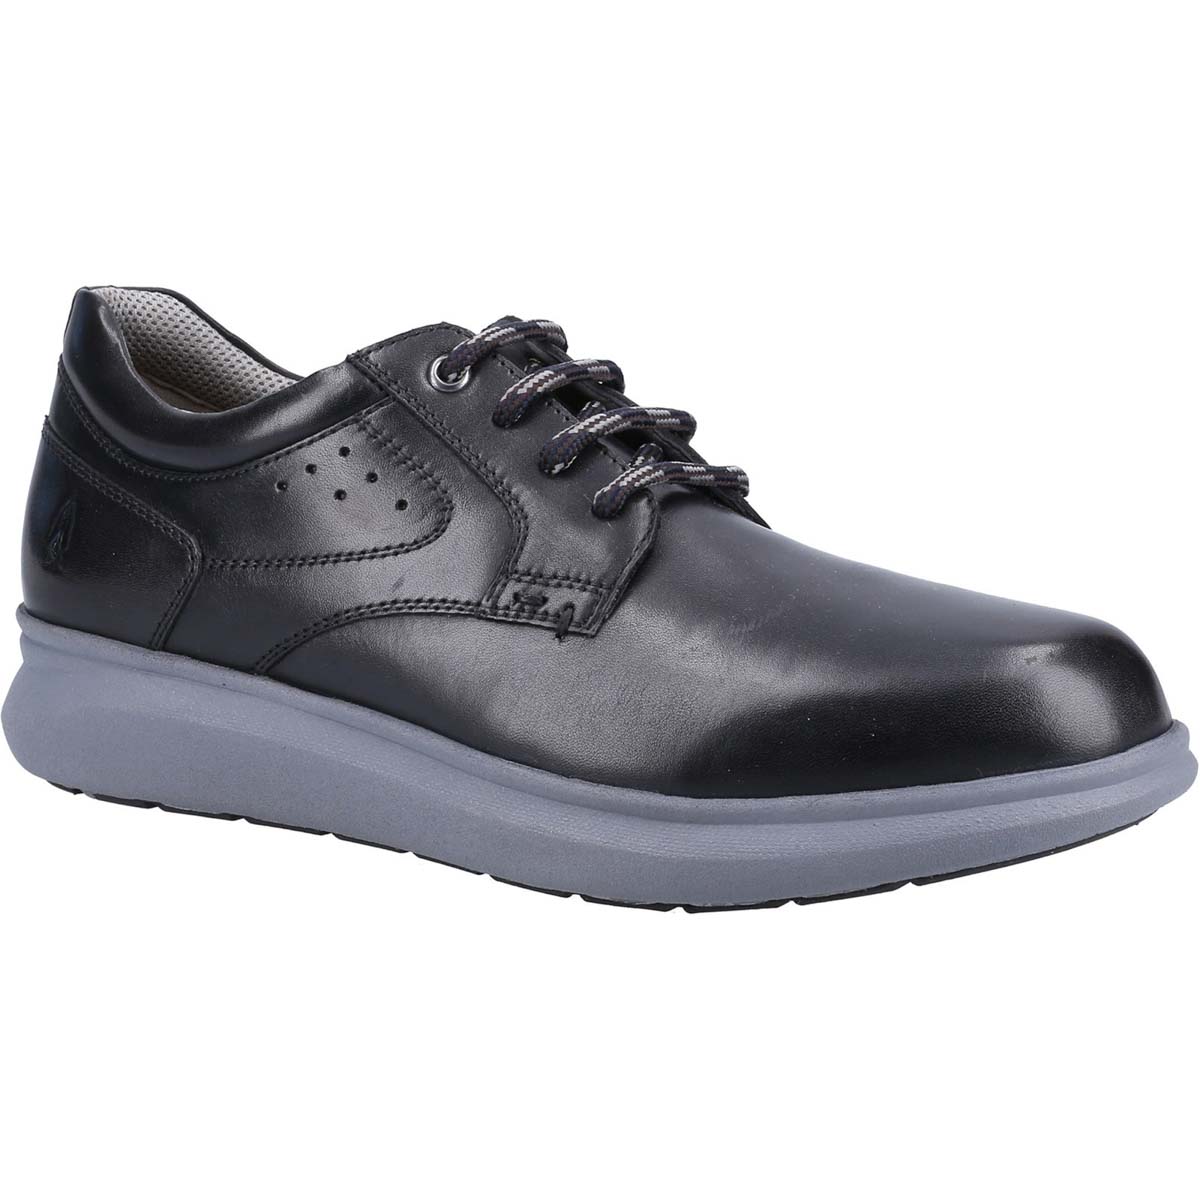 Hush Puppies Brett Black Mens fashion shoes 36668-68480 in a Plain Leather in Size 12